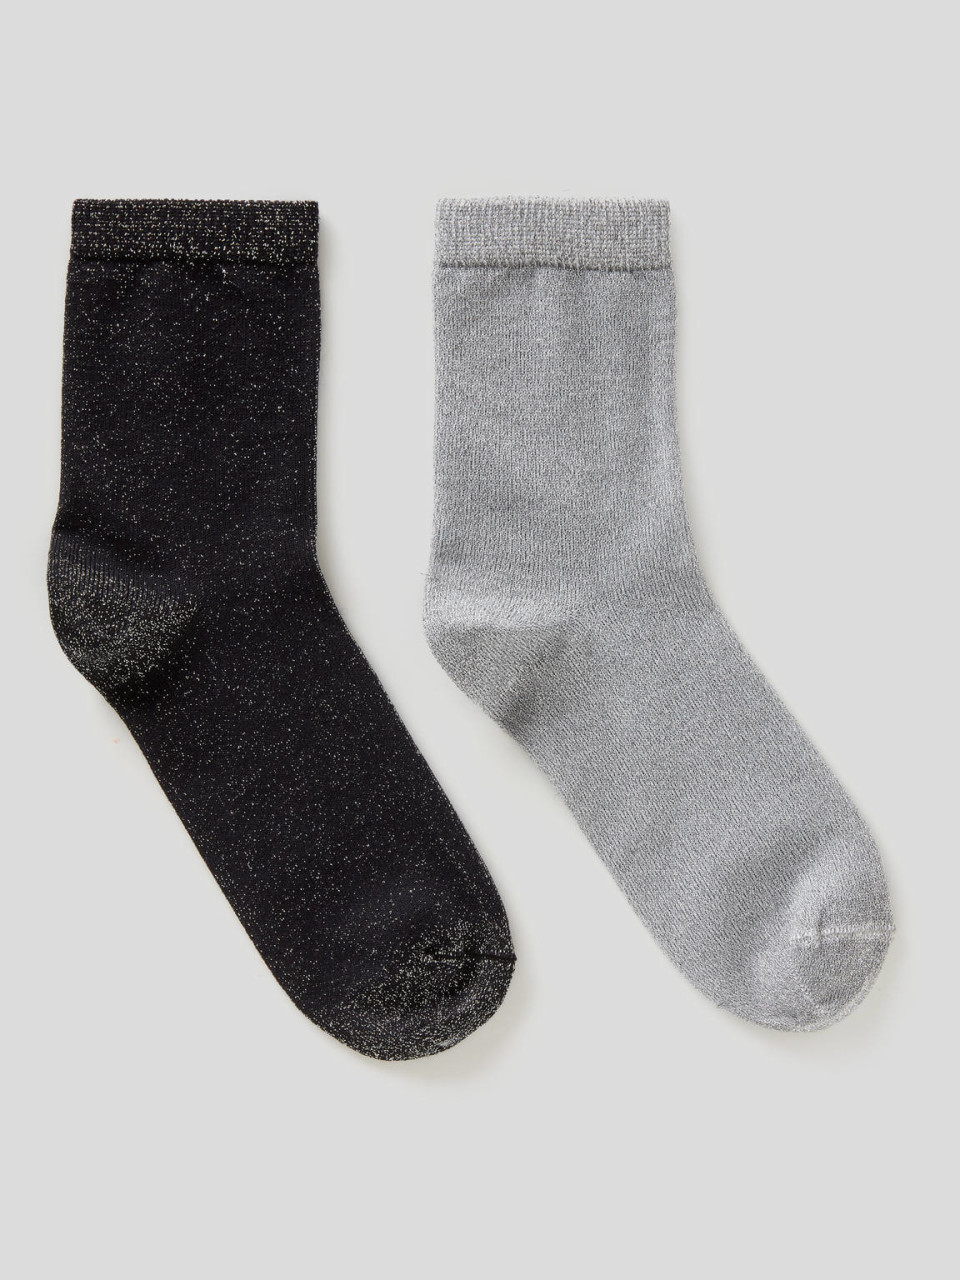 Benetton, Two Pairs Of Socks With Lurex Thread, Black, Kids